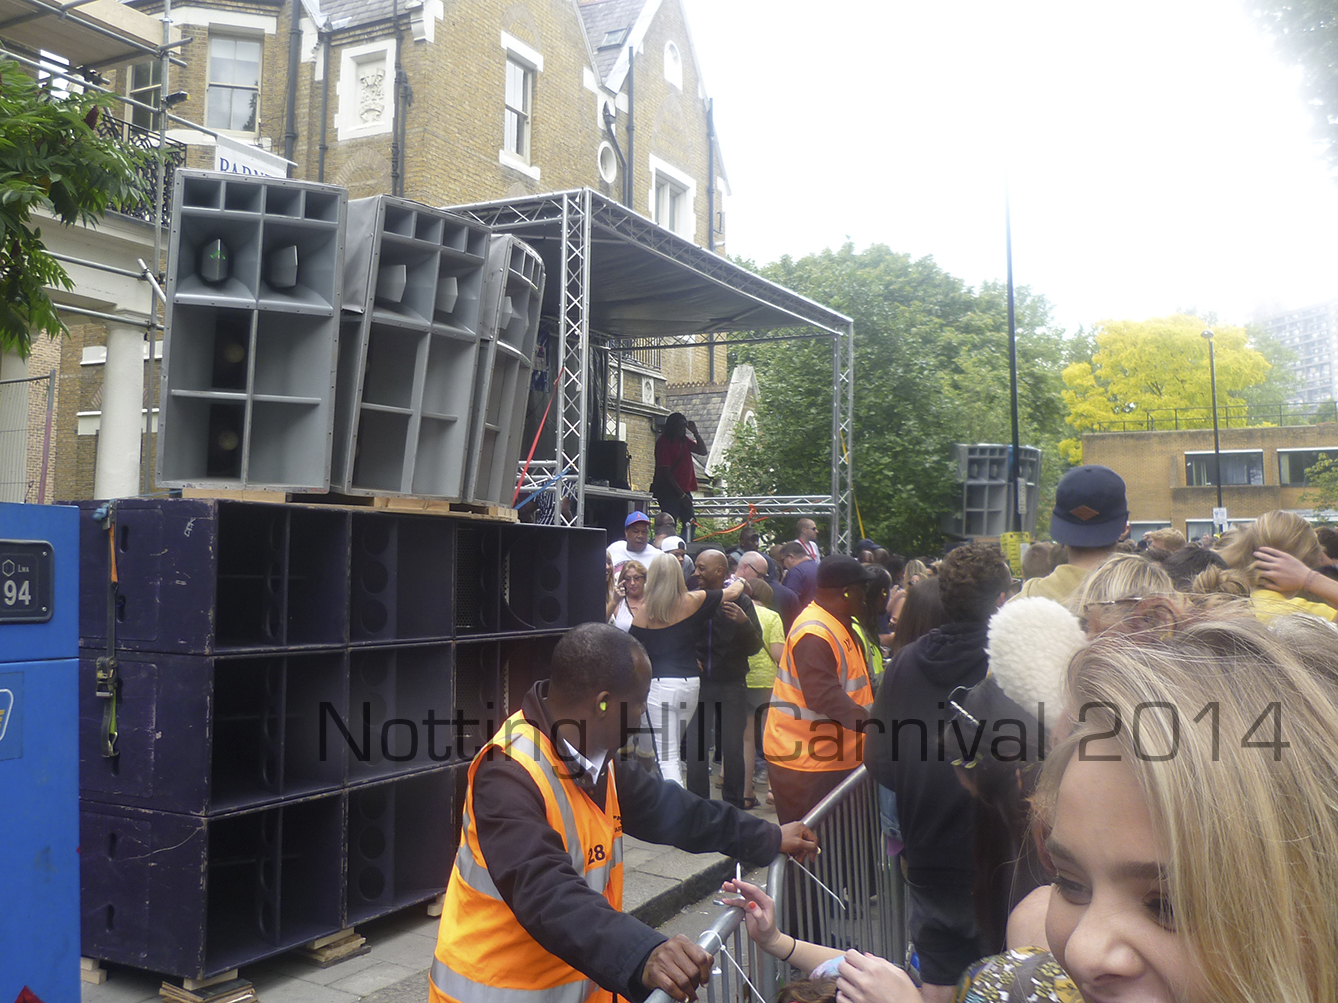 Notting-Hill-Carnival-2014-Funktion-One-Street-Sound-System-1